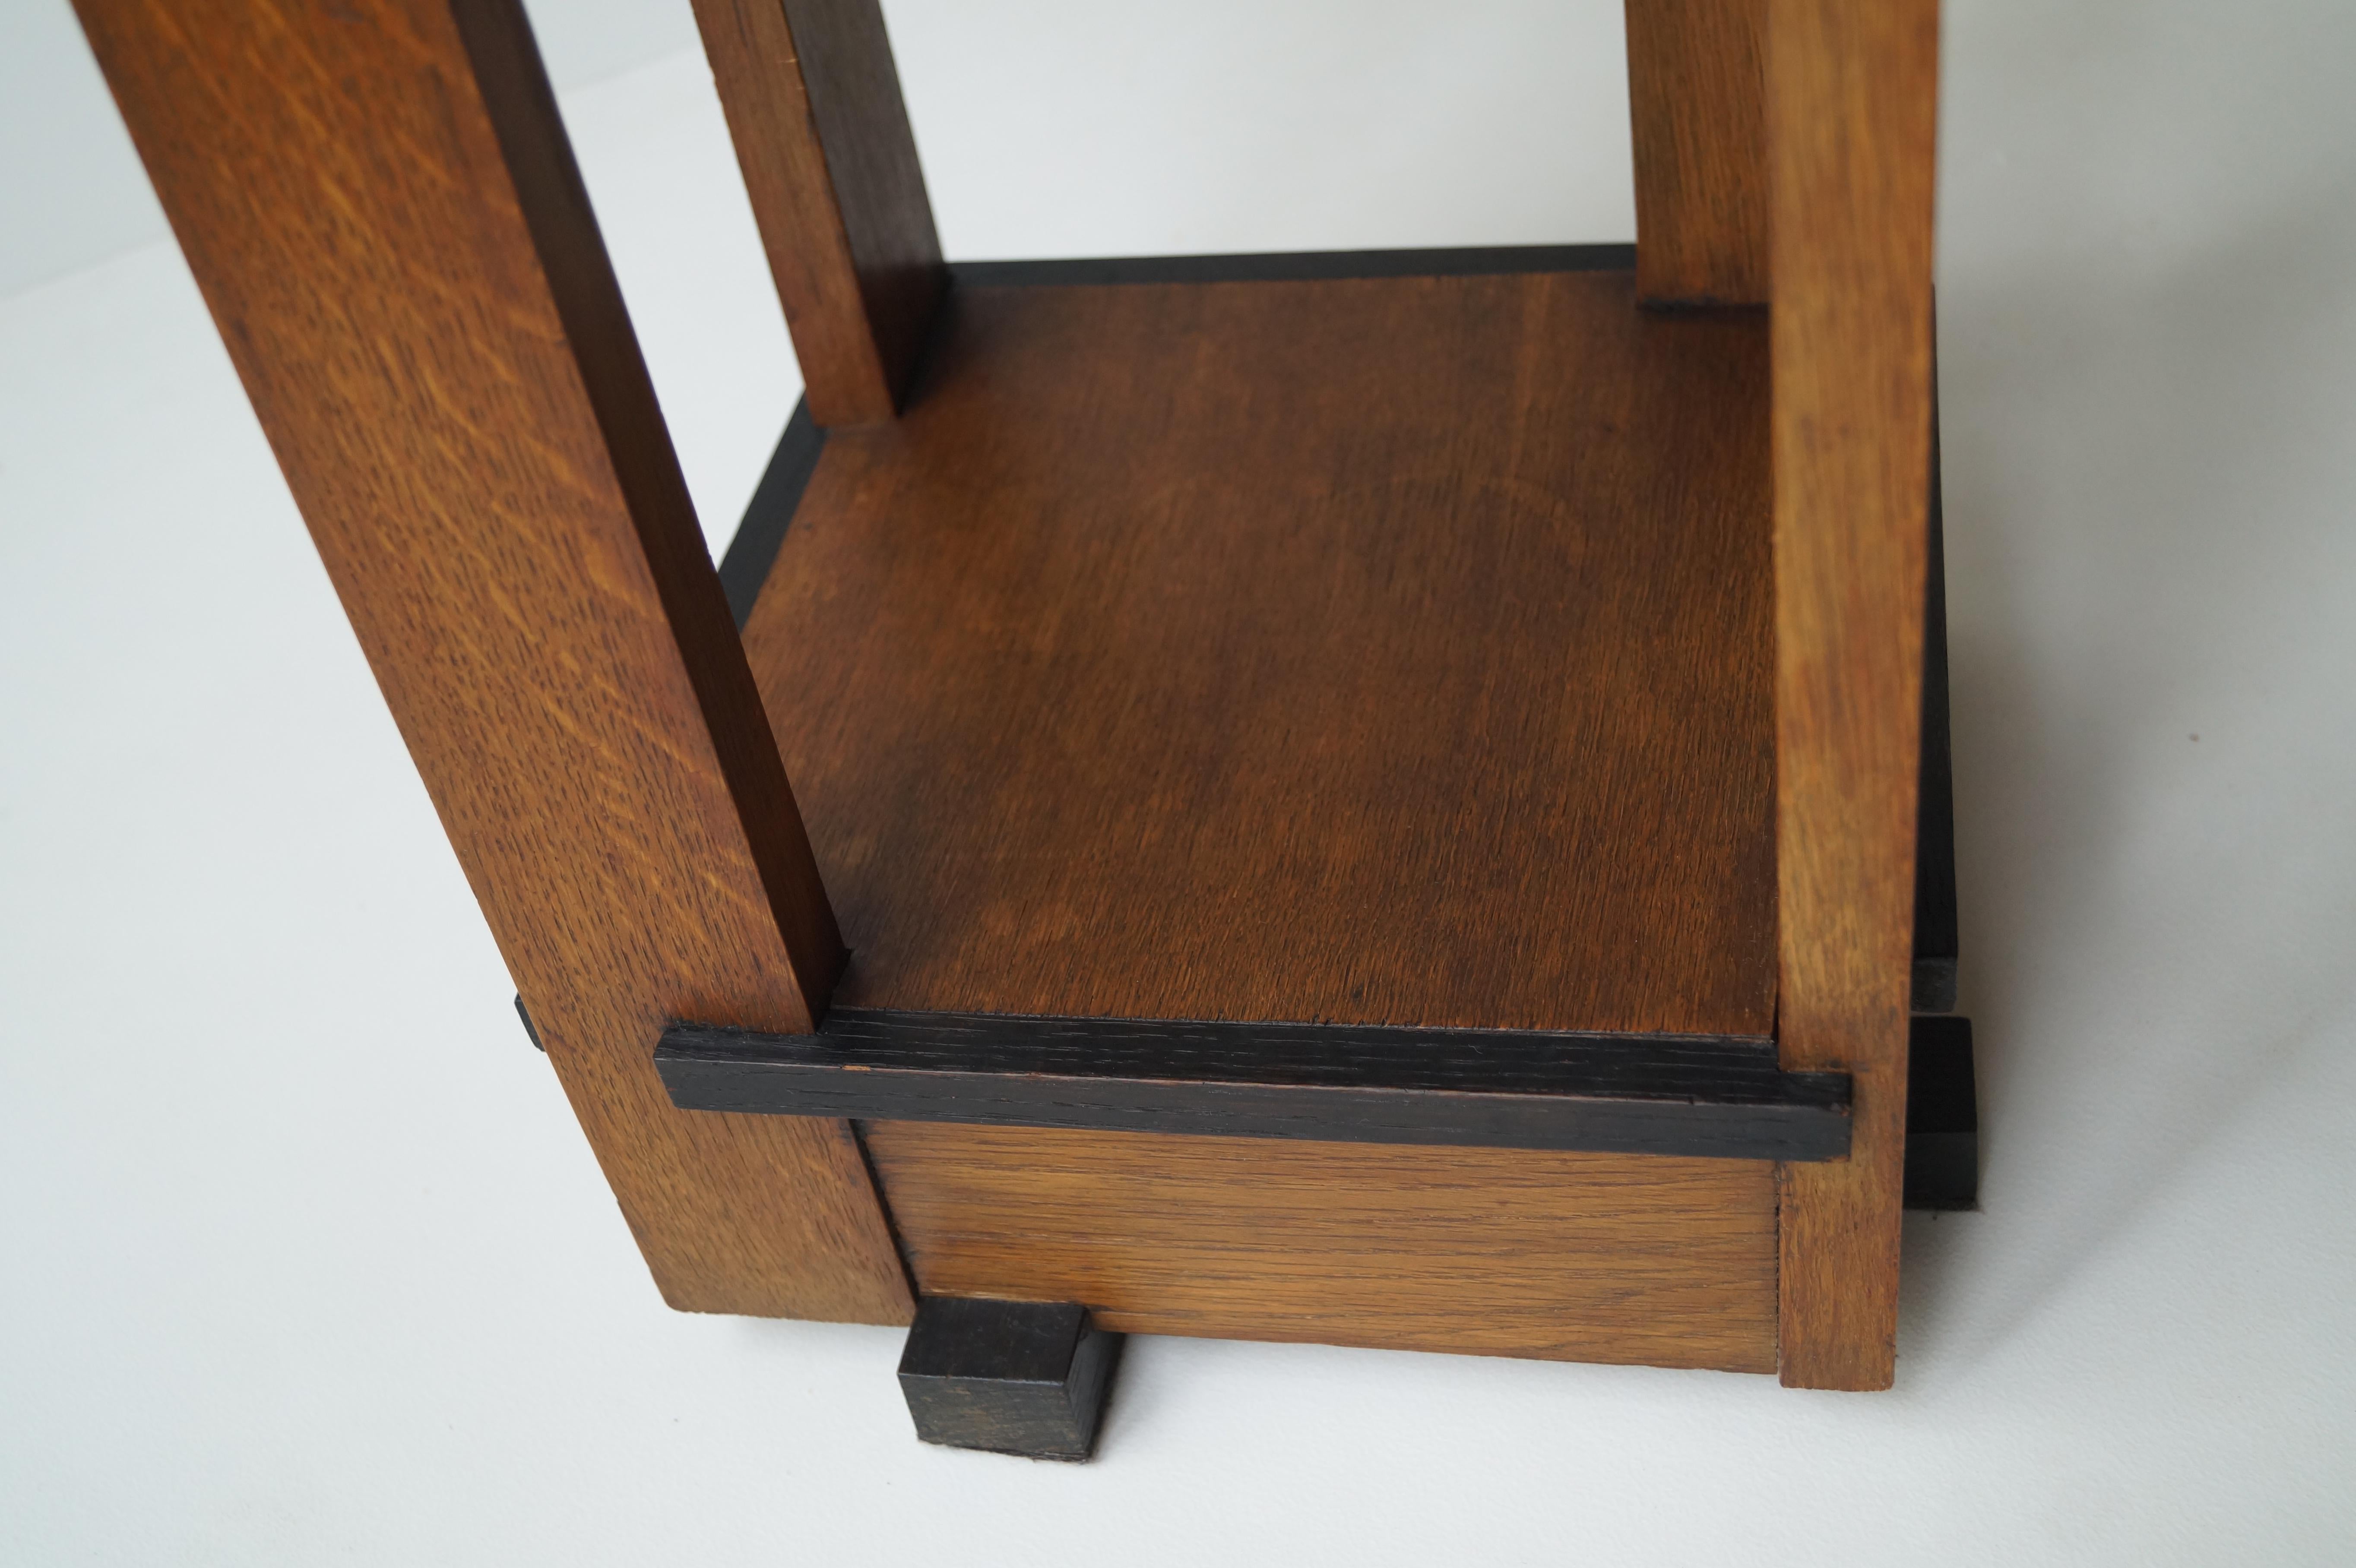 Dutch Art Deco Haagse School side table attributed to Jan Brunott, 1920s For Sale 3